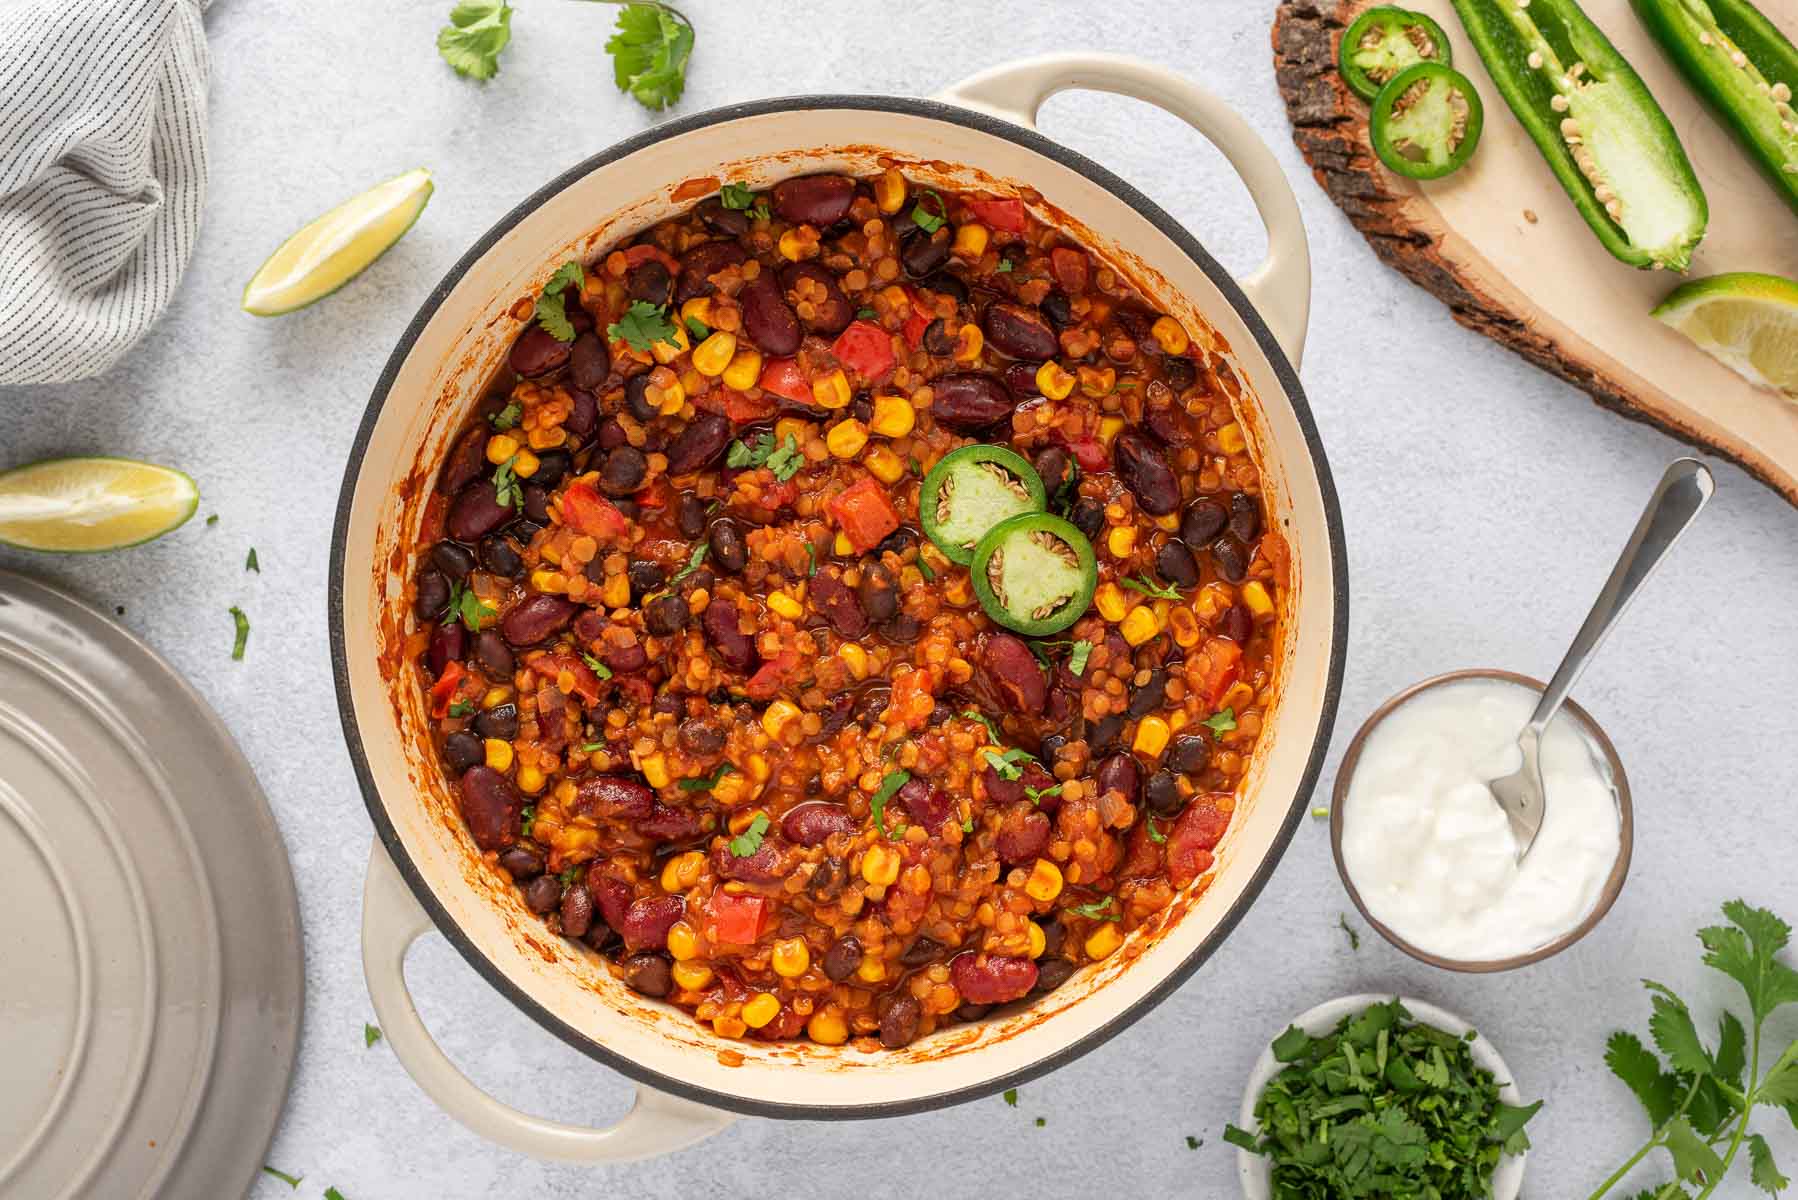 Red lentil chili with black beans and kidney beans.